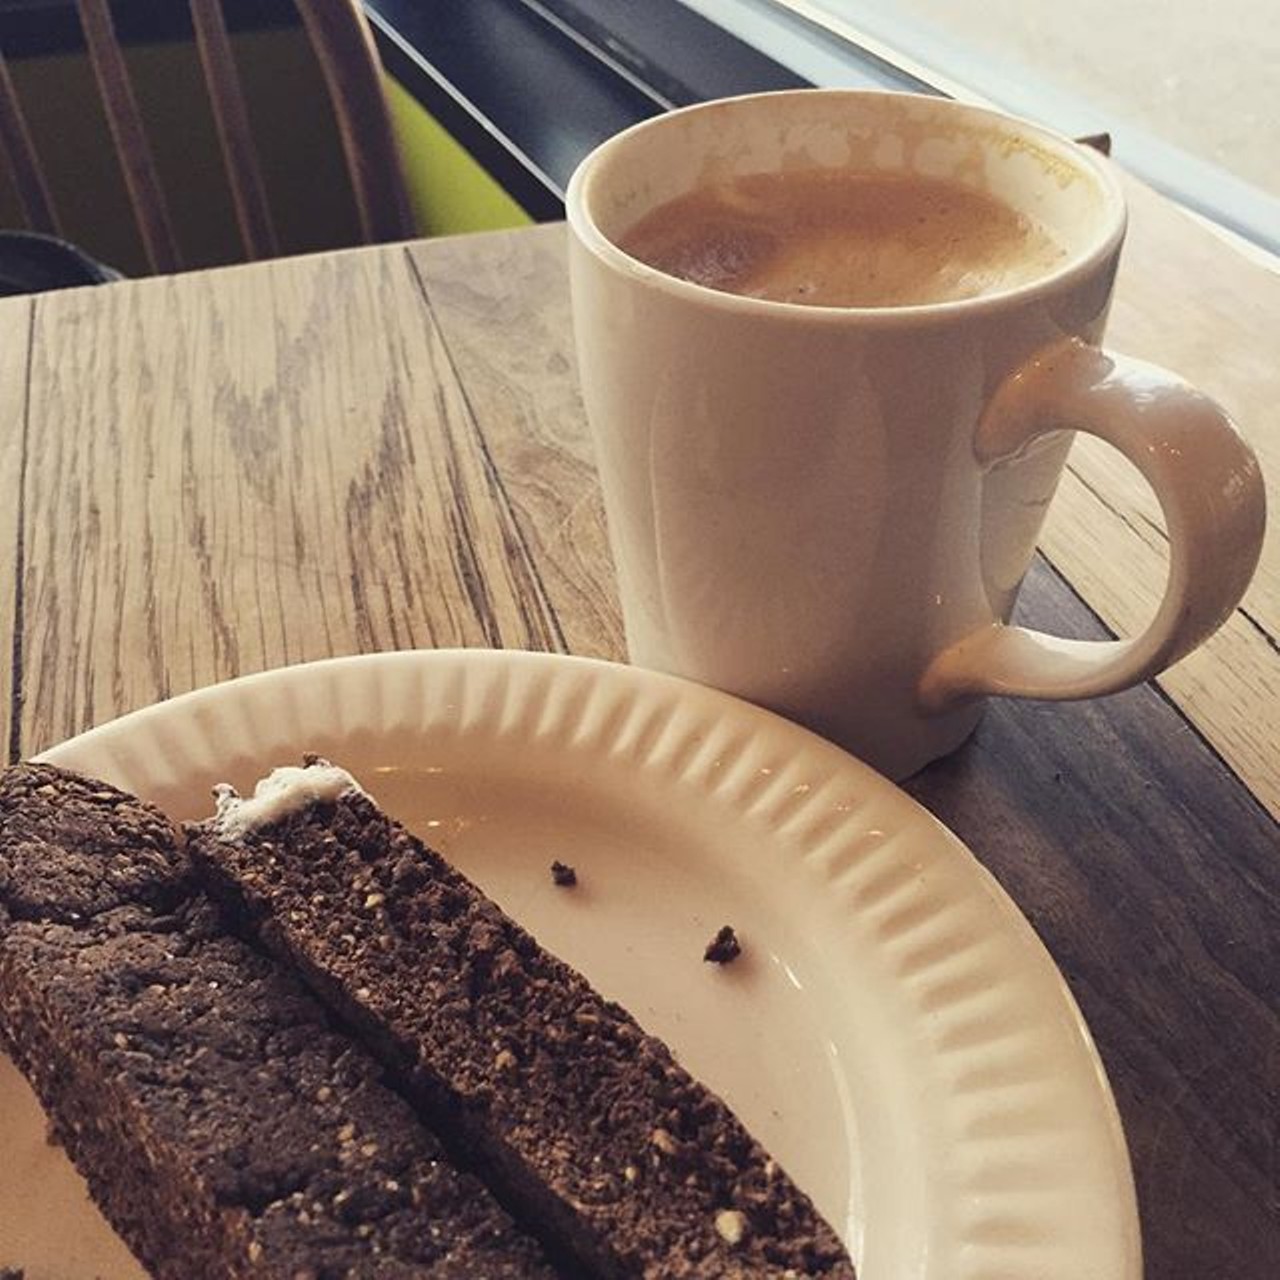 The Root Cafe - 15118 Detroit Ave
The Root Cafe in Lakewood has a Mexican Cocoa that is out of control good. Made with cinnamon, cayenne, and a touch a vanilla this should not be missed. (Photo via Instagram, smashthebarwench)